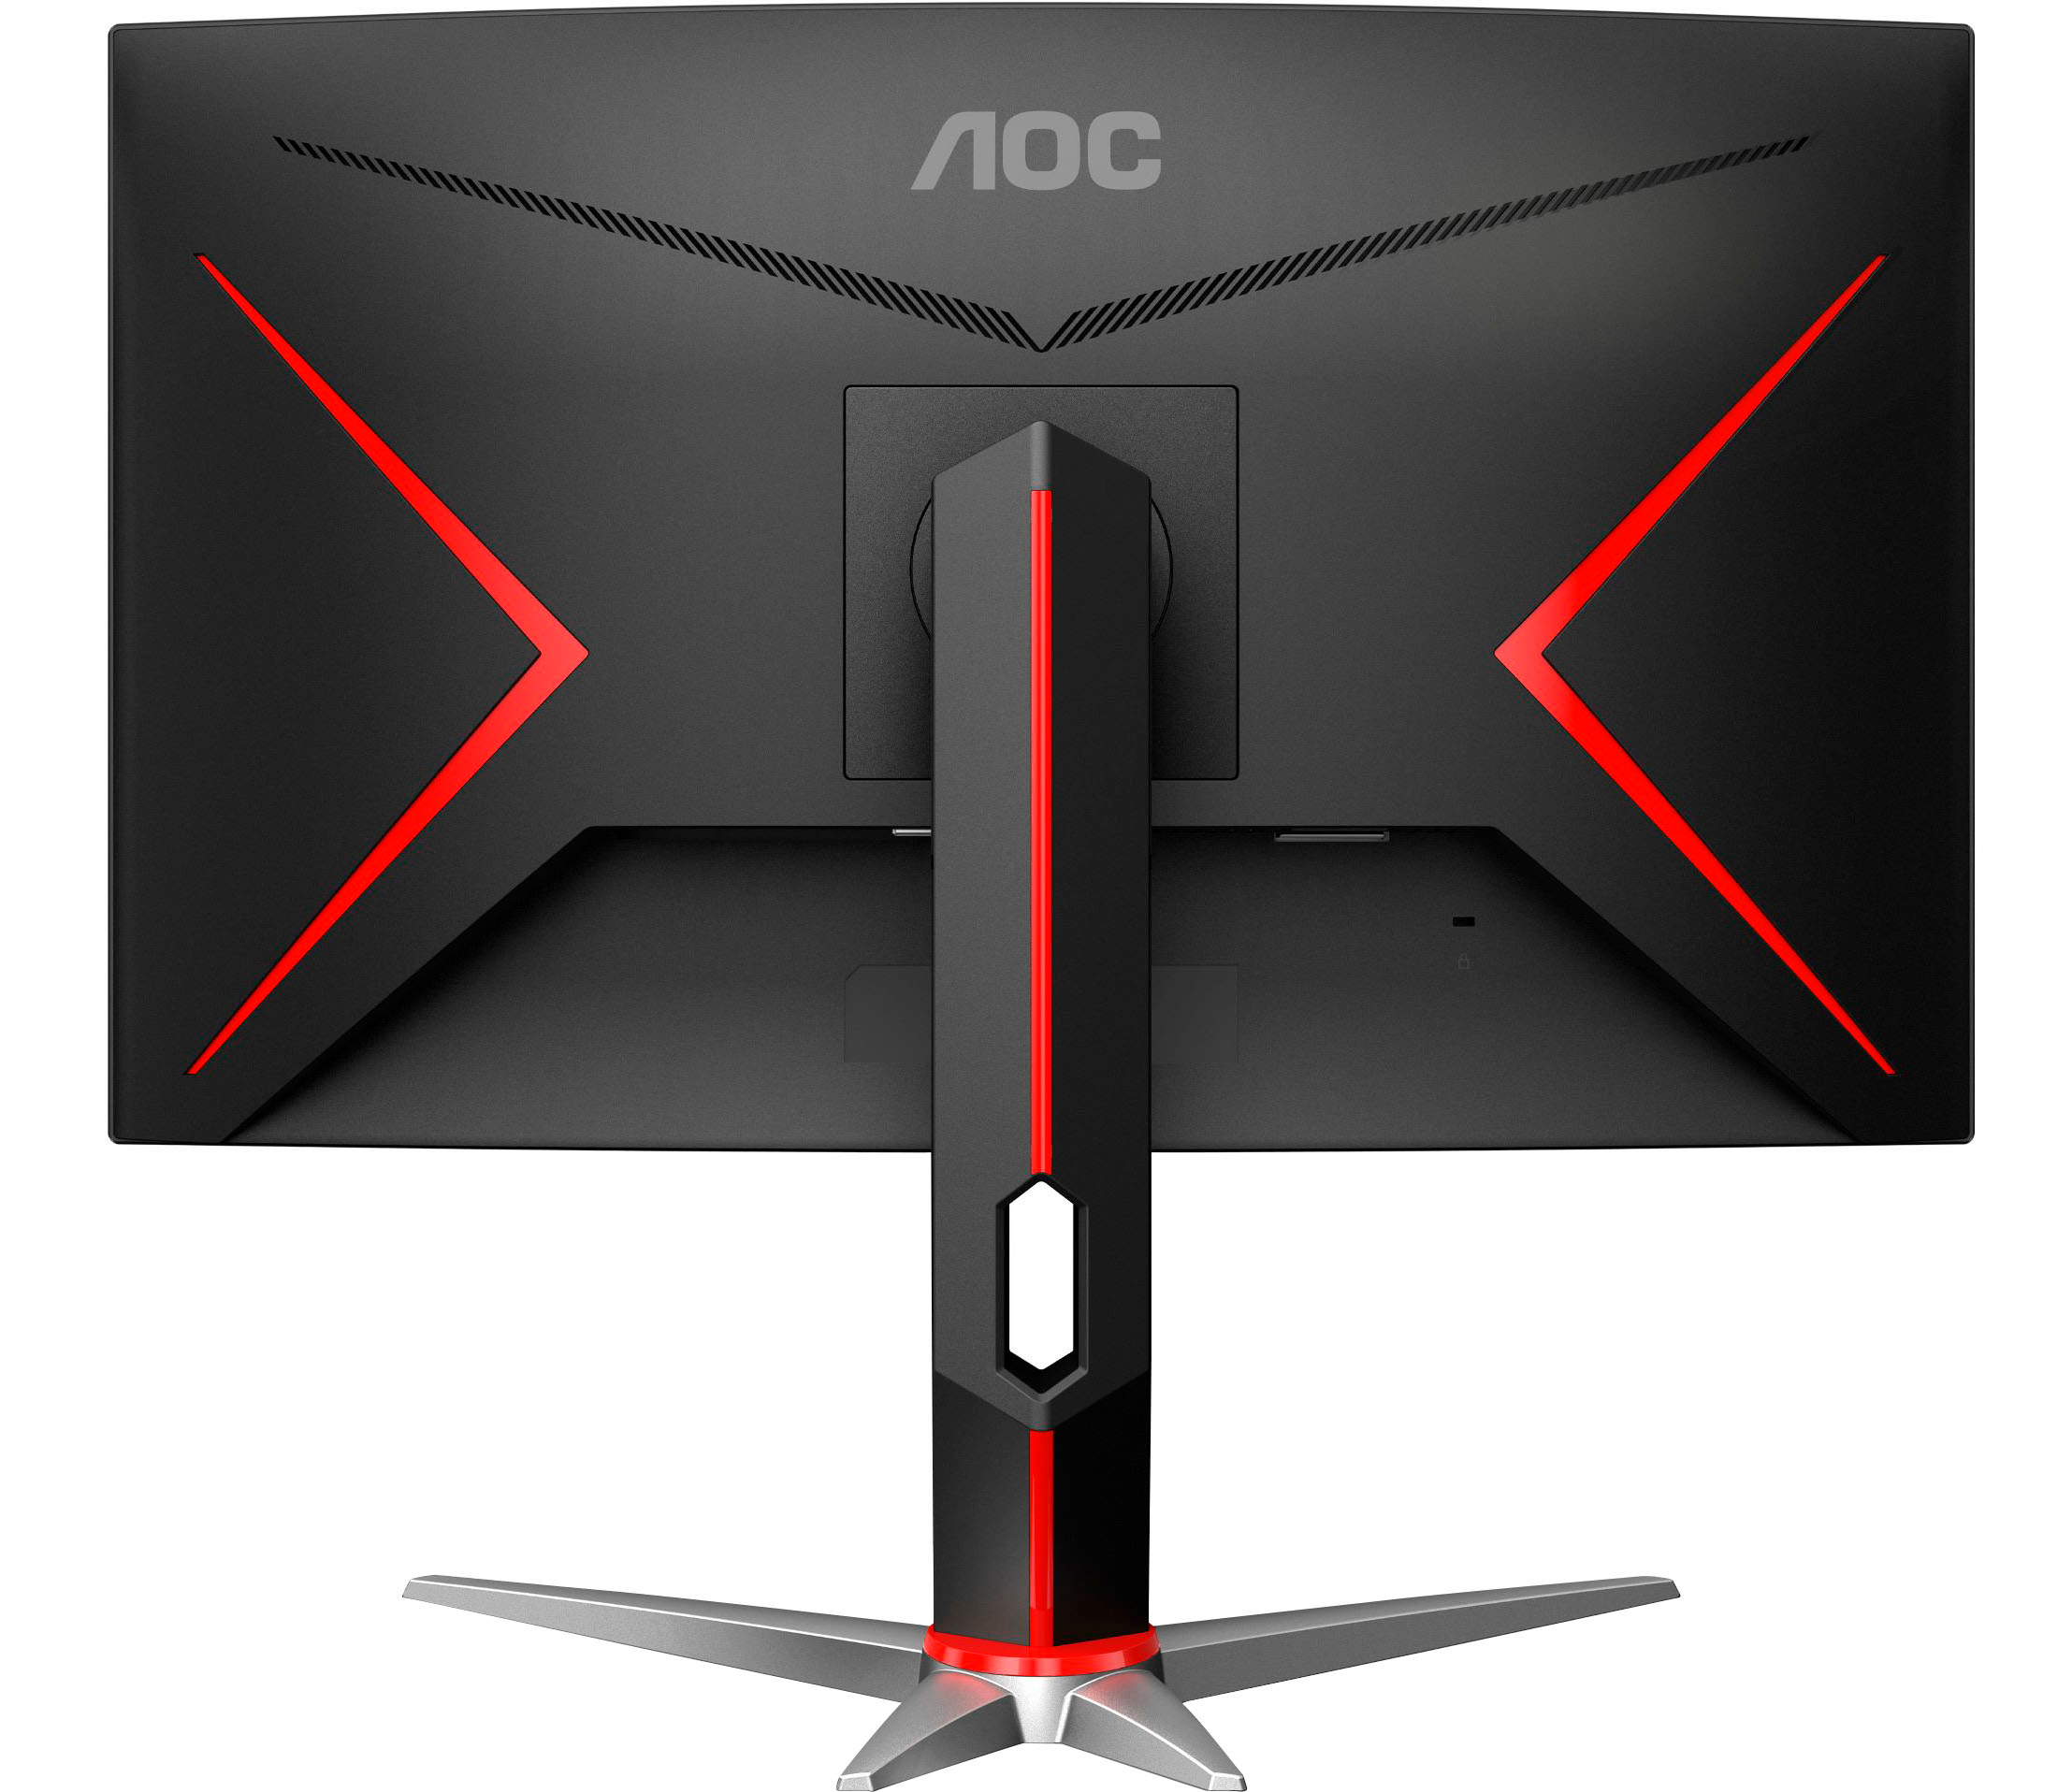 Back View: AOC - G2 Series C27G2Z 27" LCD Curved FHD FreeSync Monitor - Black/Red